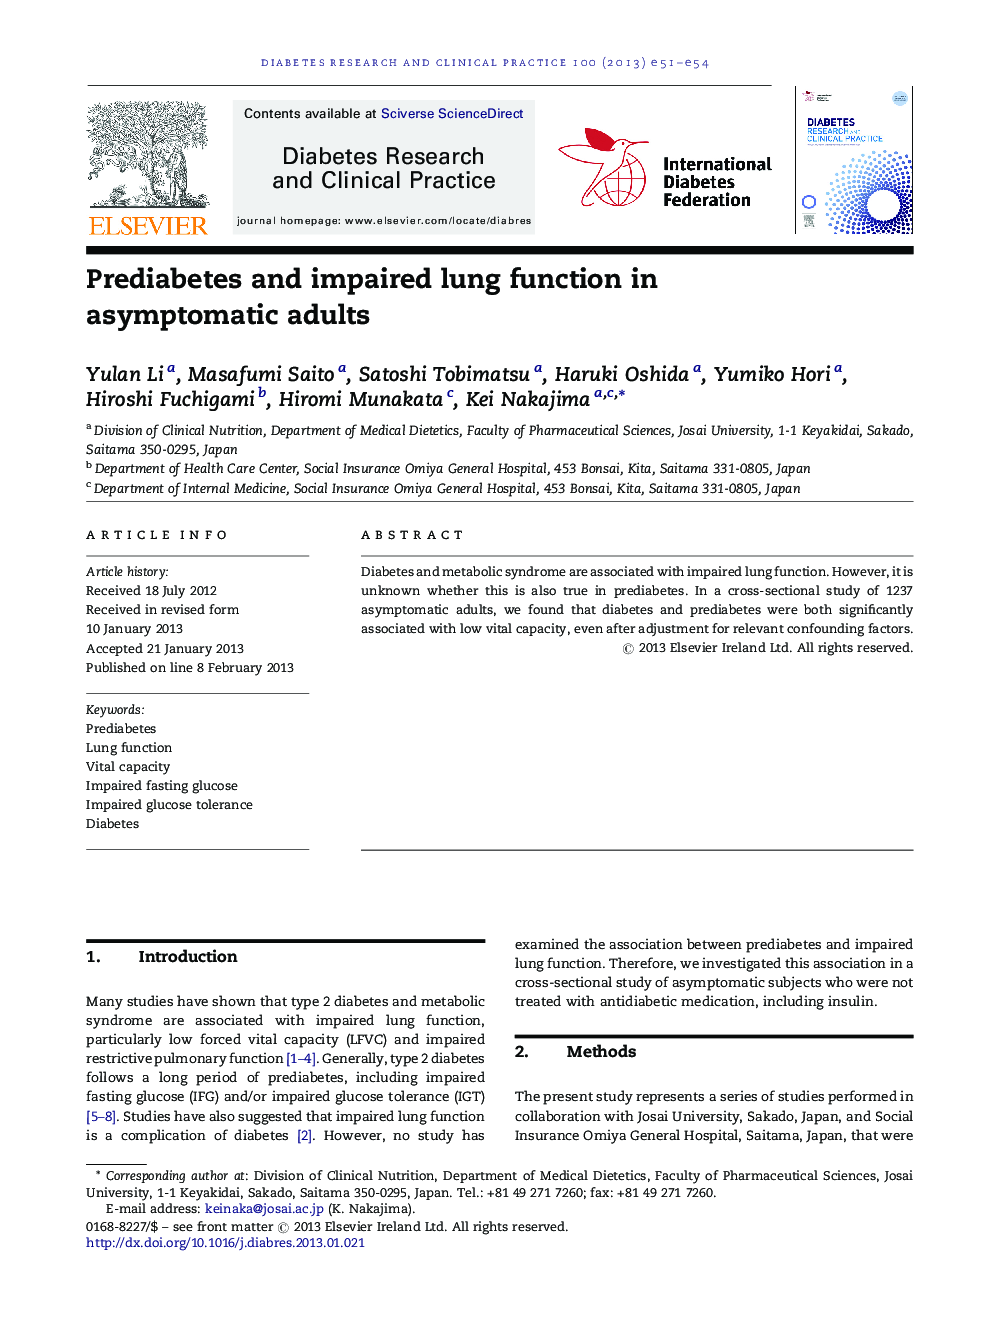 Prediabetes and impaired lung function in asymptomatic adults